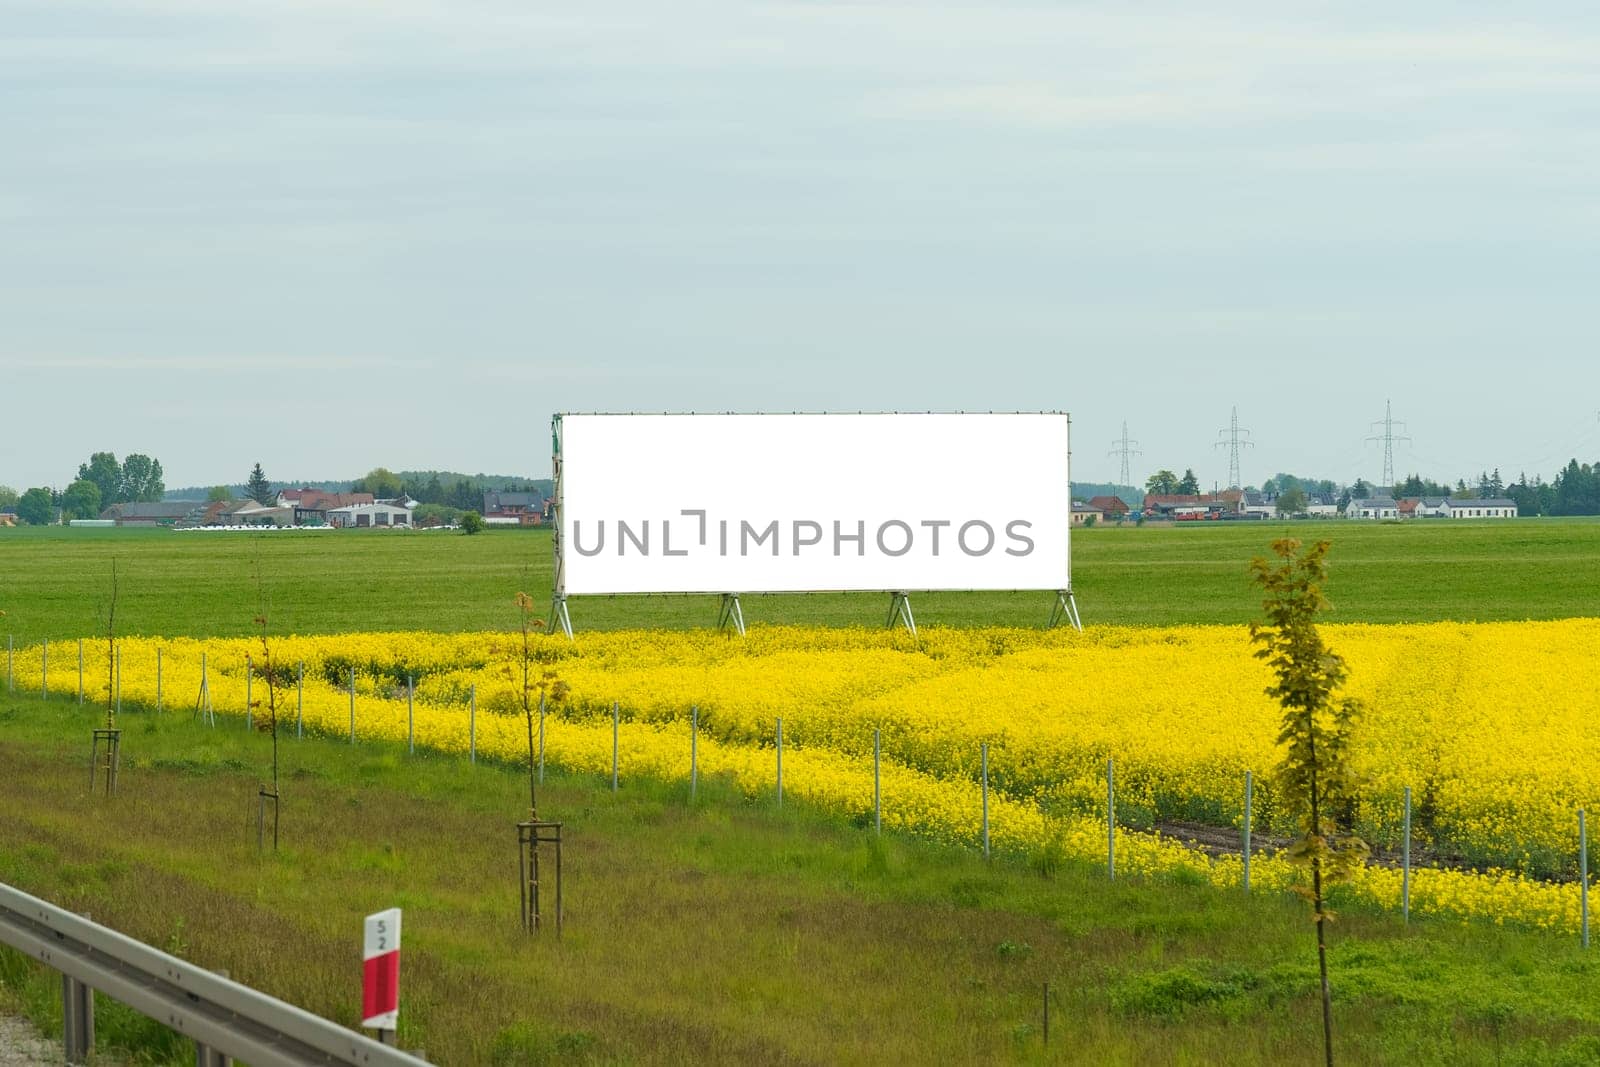 A field of yellow flowers with a billboard in the foreground under a clear sky.